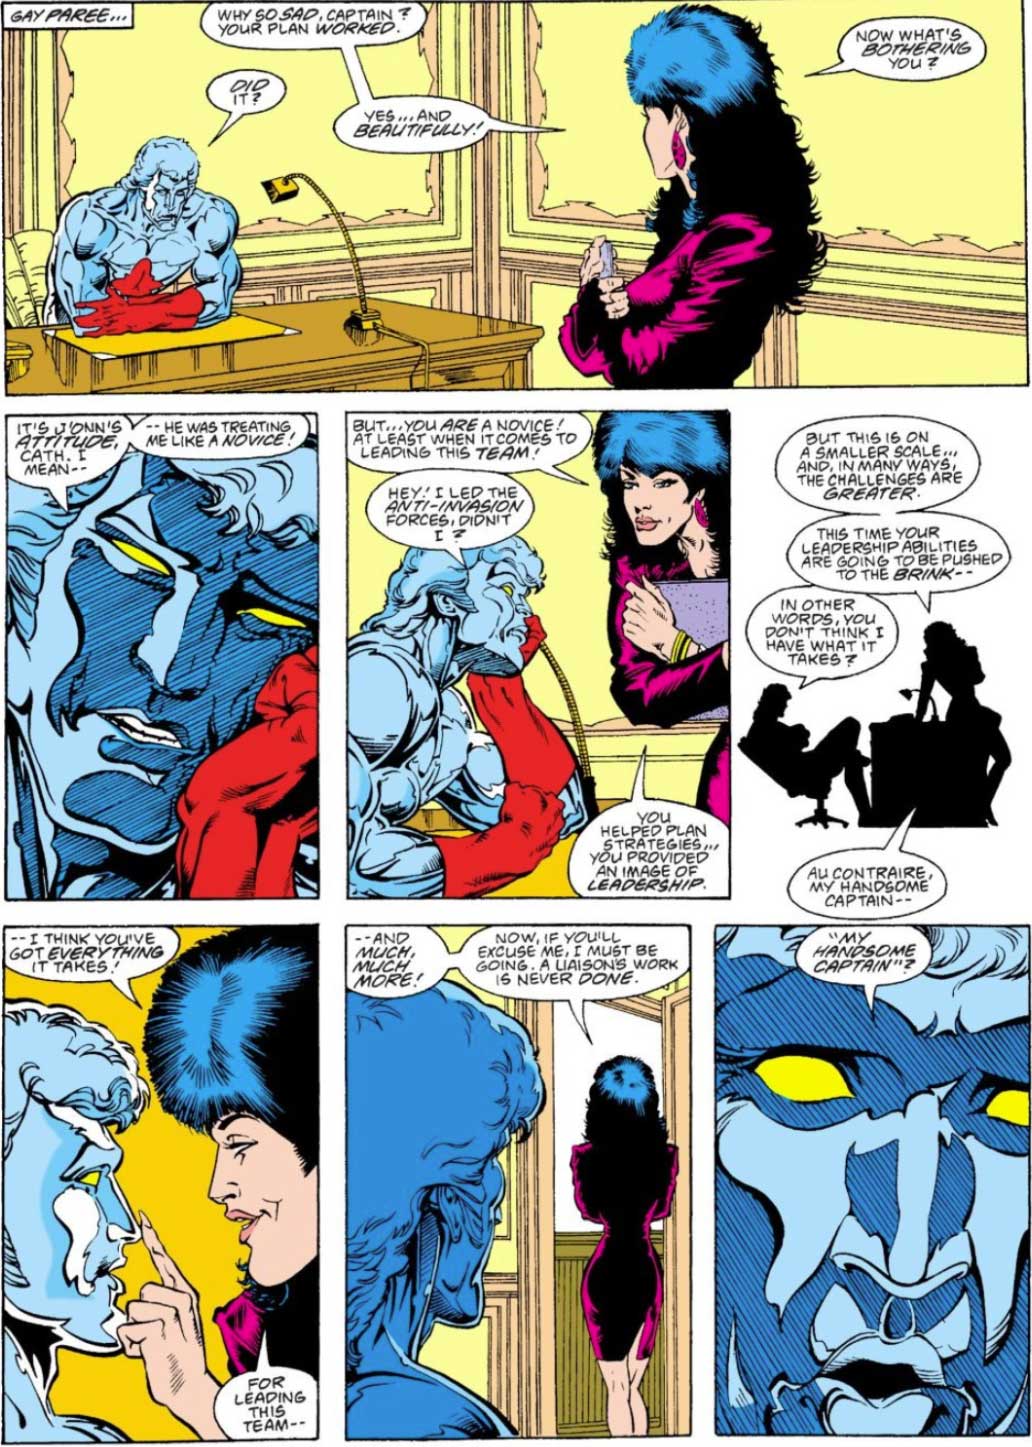 Justice League Europe #4 by Keith Giffen, J.M. DeMatteis, Bart Sears and Pablo Marcos